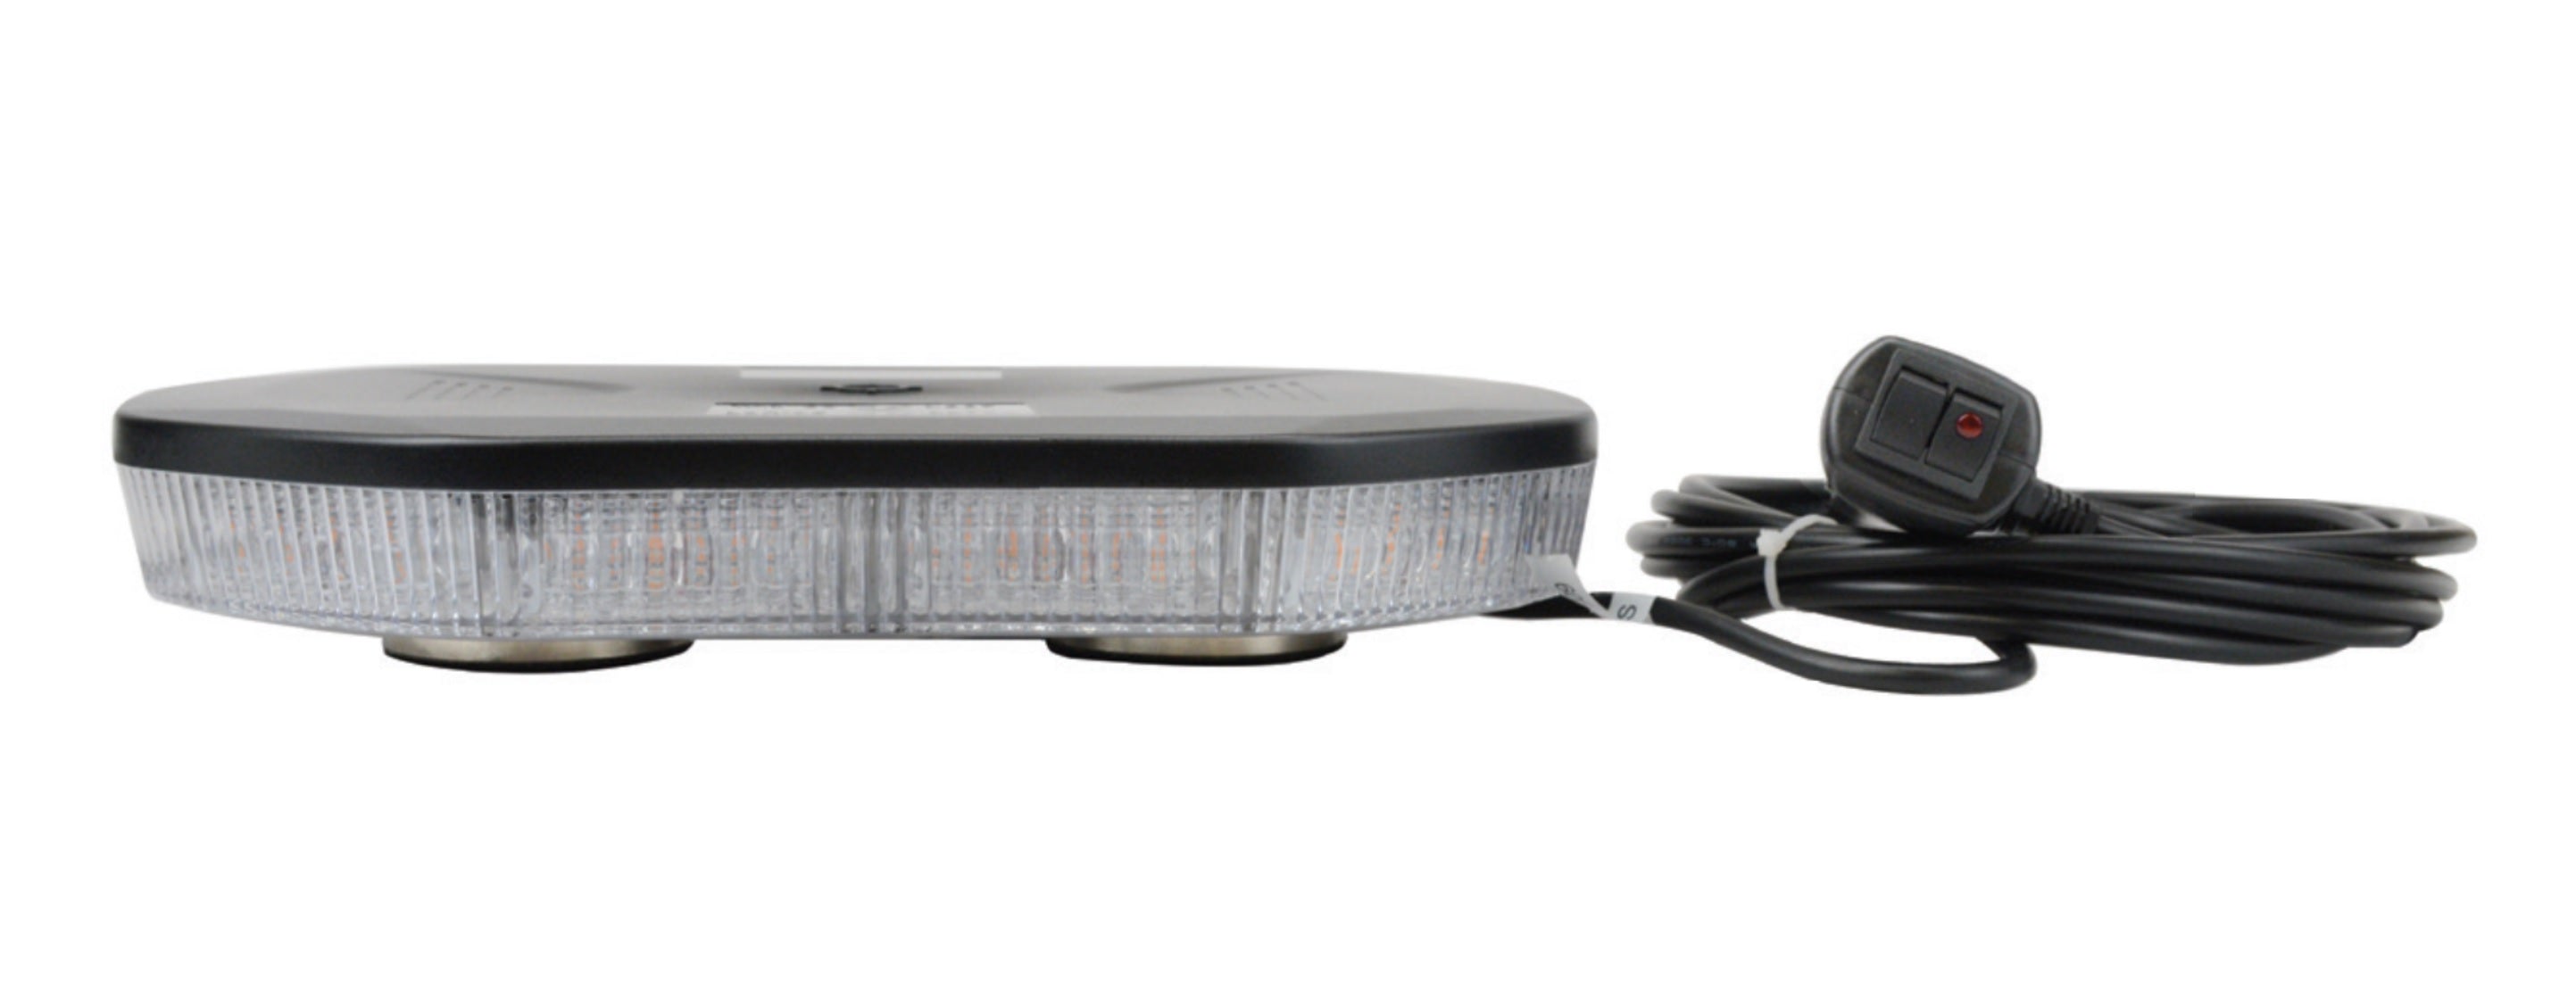 Techspan Compact LED Light Bar with Multiple Flash Pattern and Magneti